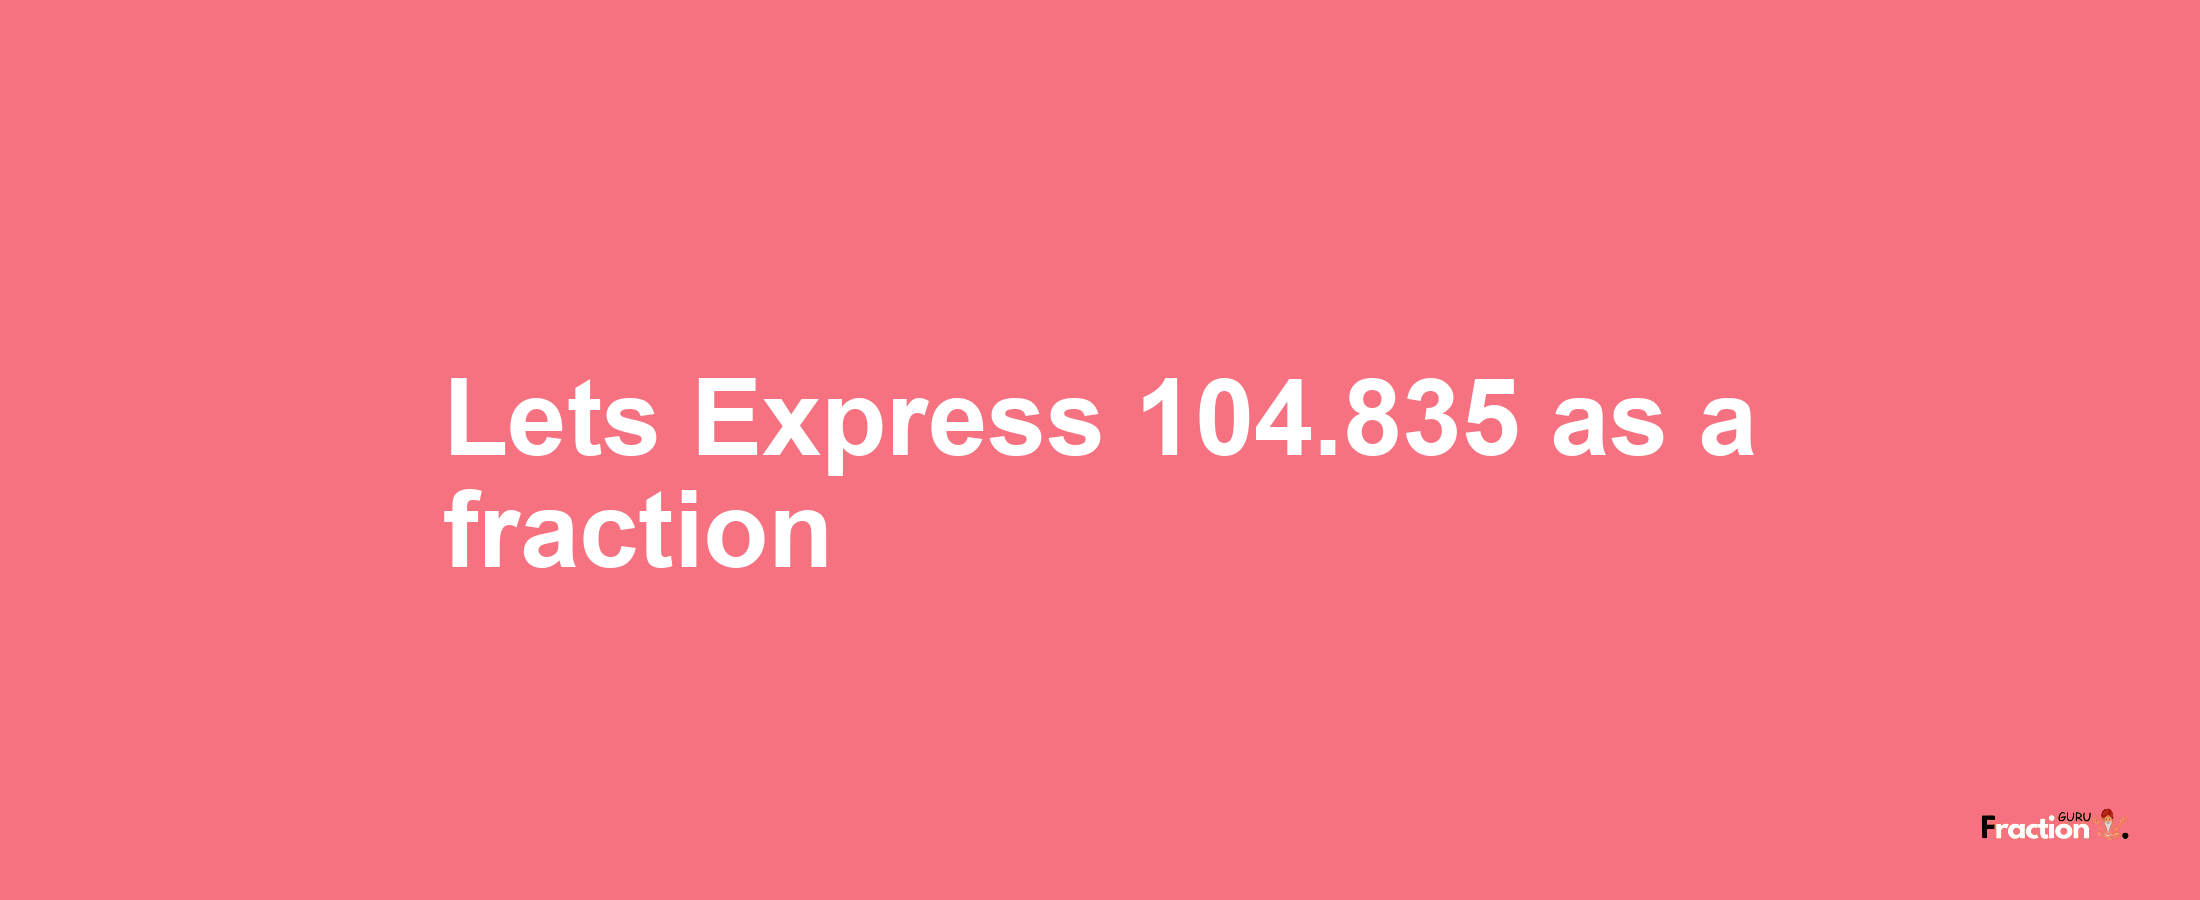 Lets Express 104.835 as afraction